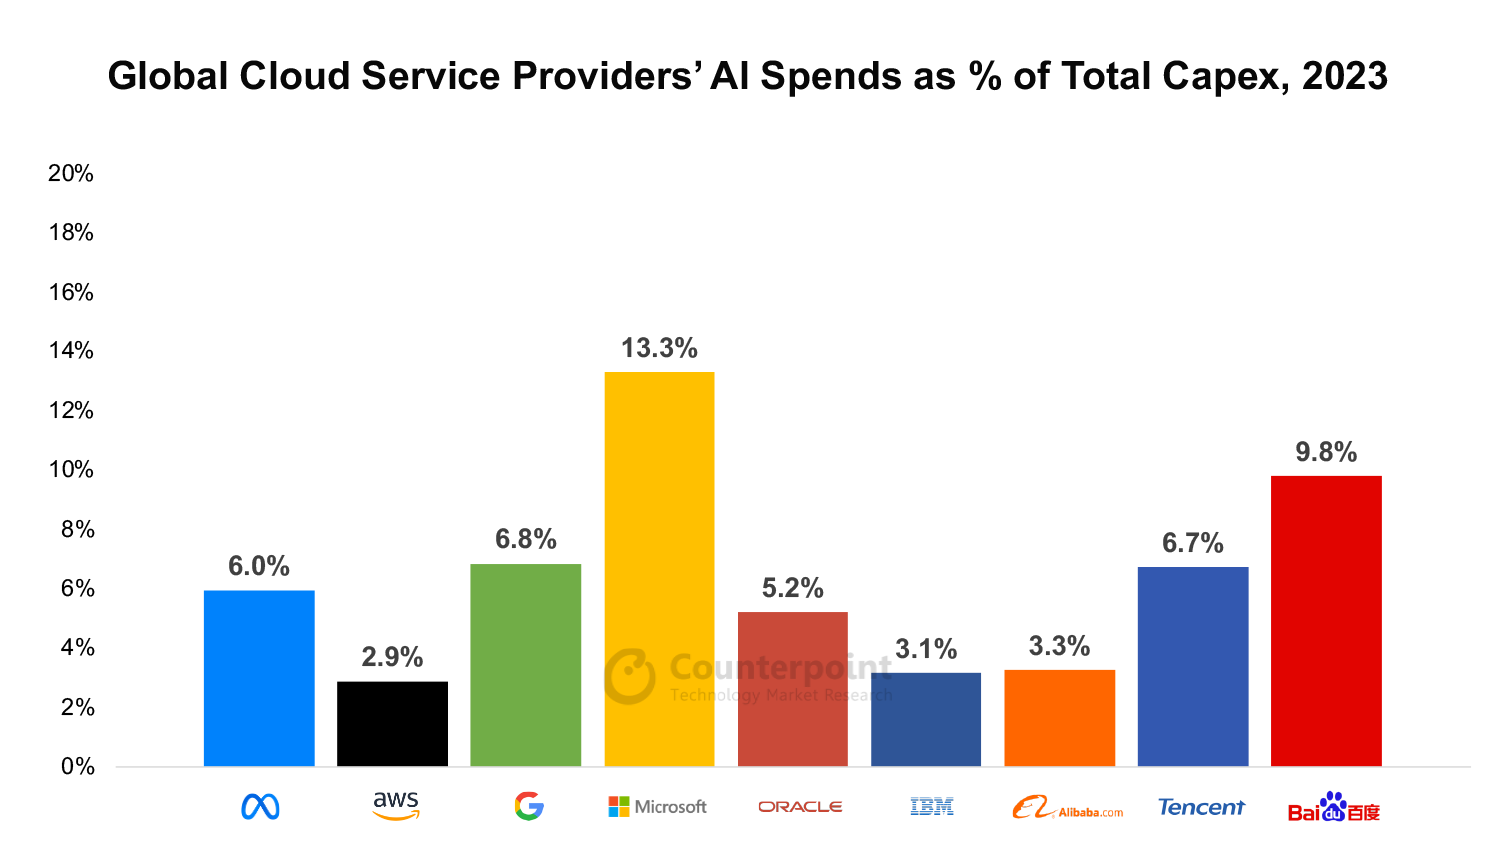 Global Cloud Service Provider's AI spends as % of Total Capex, 2023